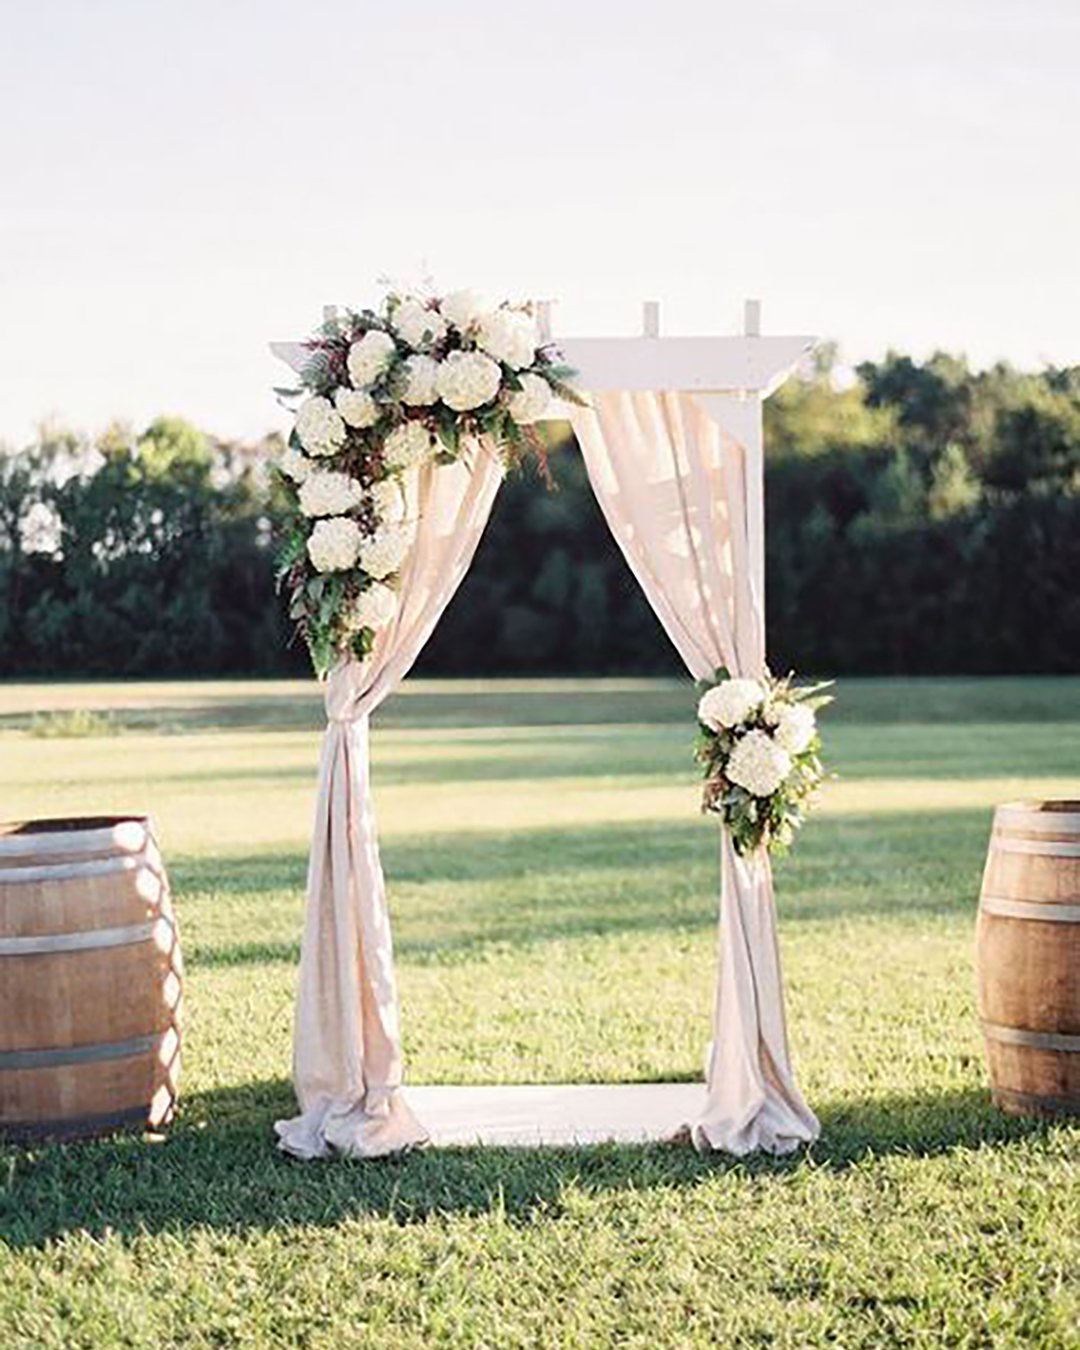 rustic wedding décor white wooden arch decorated with white cloth and flowers surrounded by barrels michael and carina photography